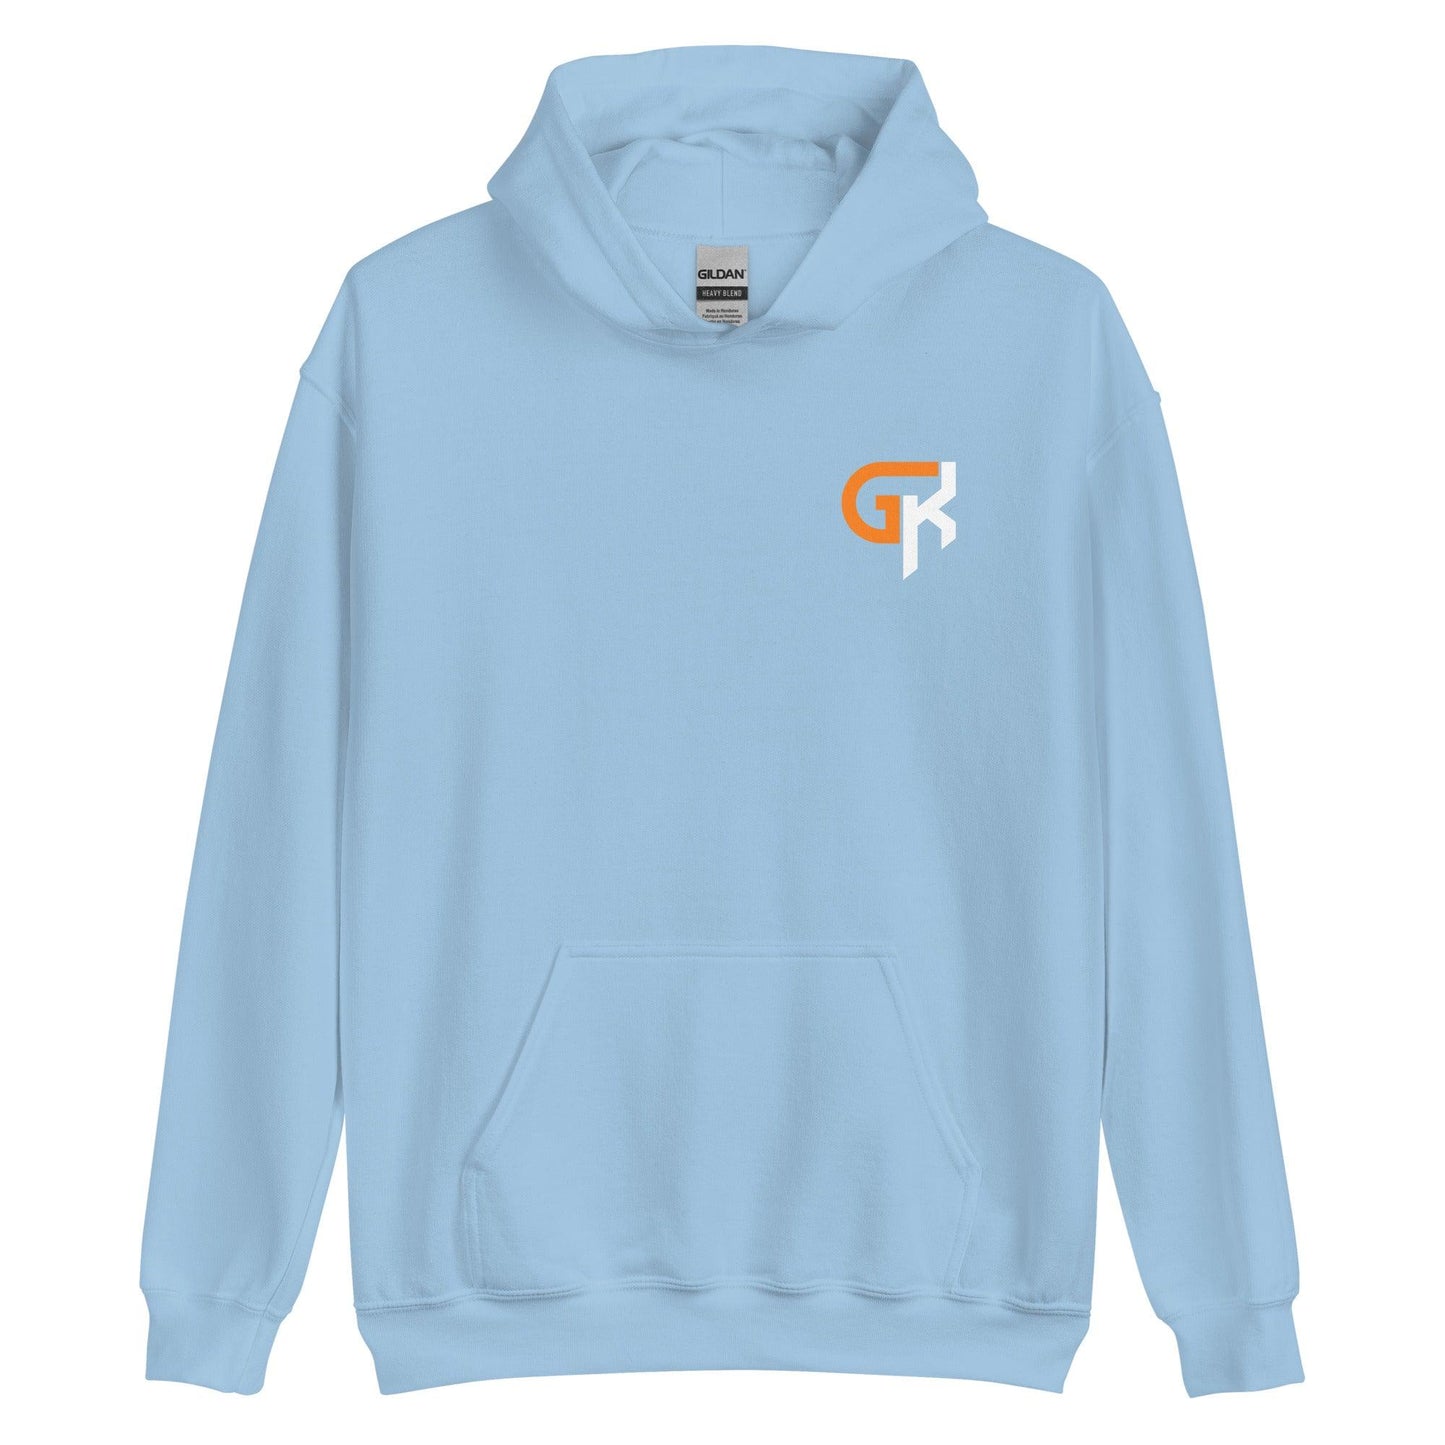 Grant Knipp "Signature" Hoodie - Fan Arch